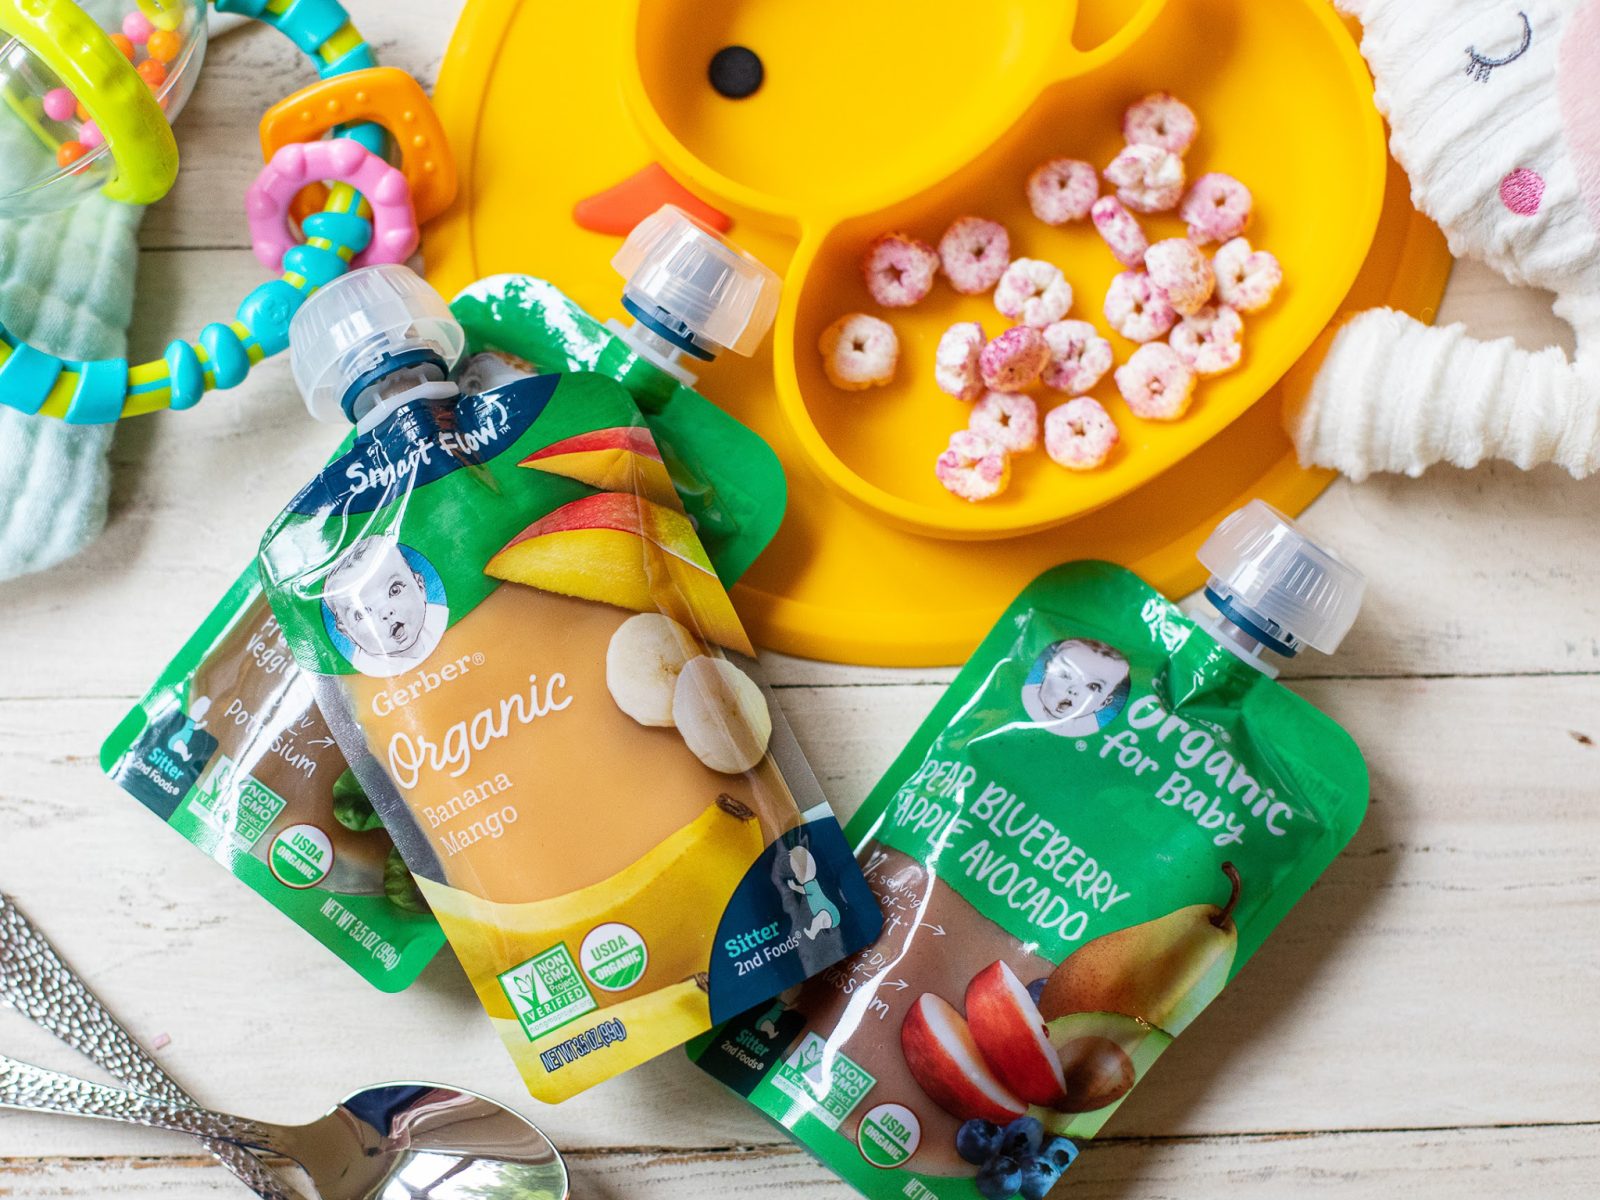 Pick Up Gerber Organic Baby Food Pouches For As Low As 94¢ At Kroger (Plus Cheap Jars)